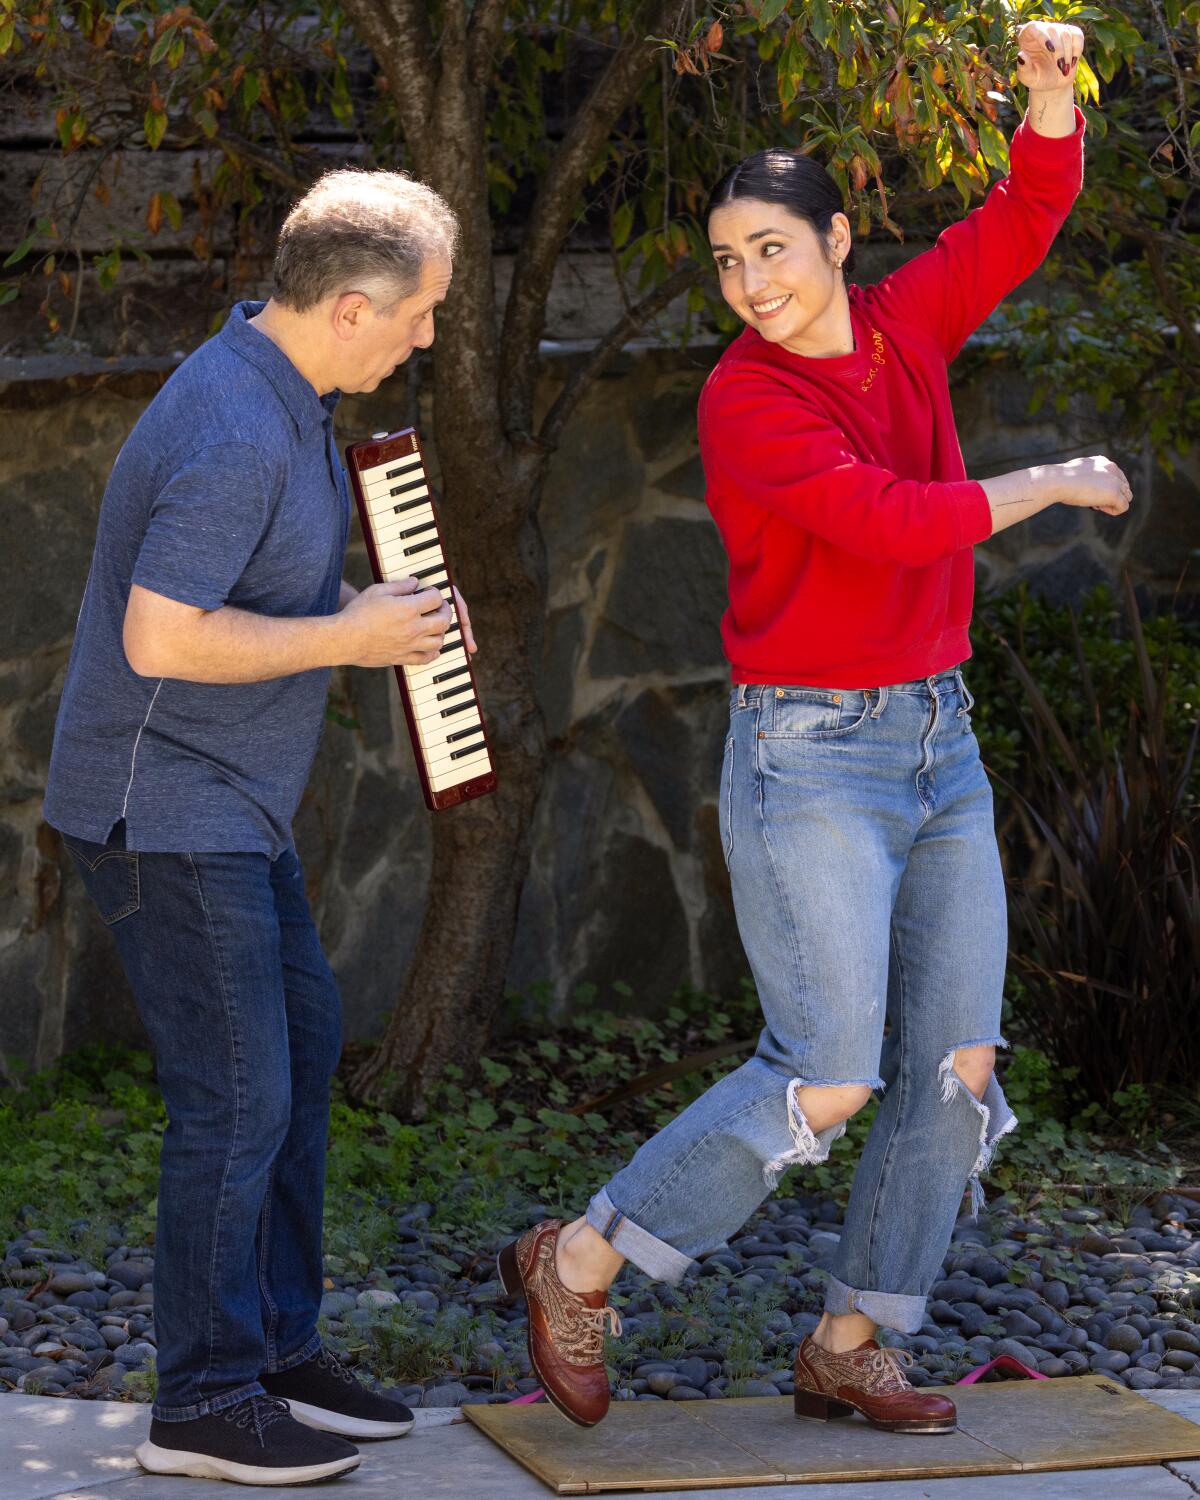 Tap dancer Melinda Sullivan and jazz pianist Larry Goldings practice their musical performance together.